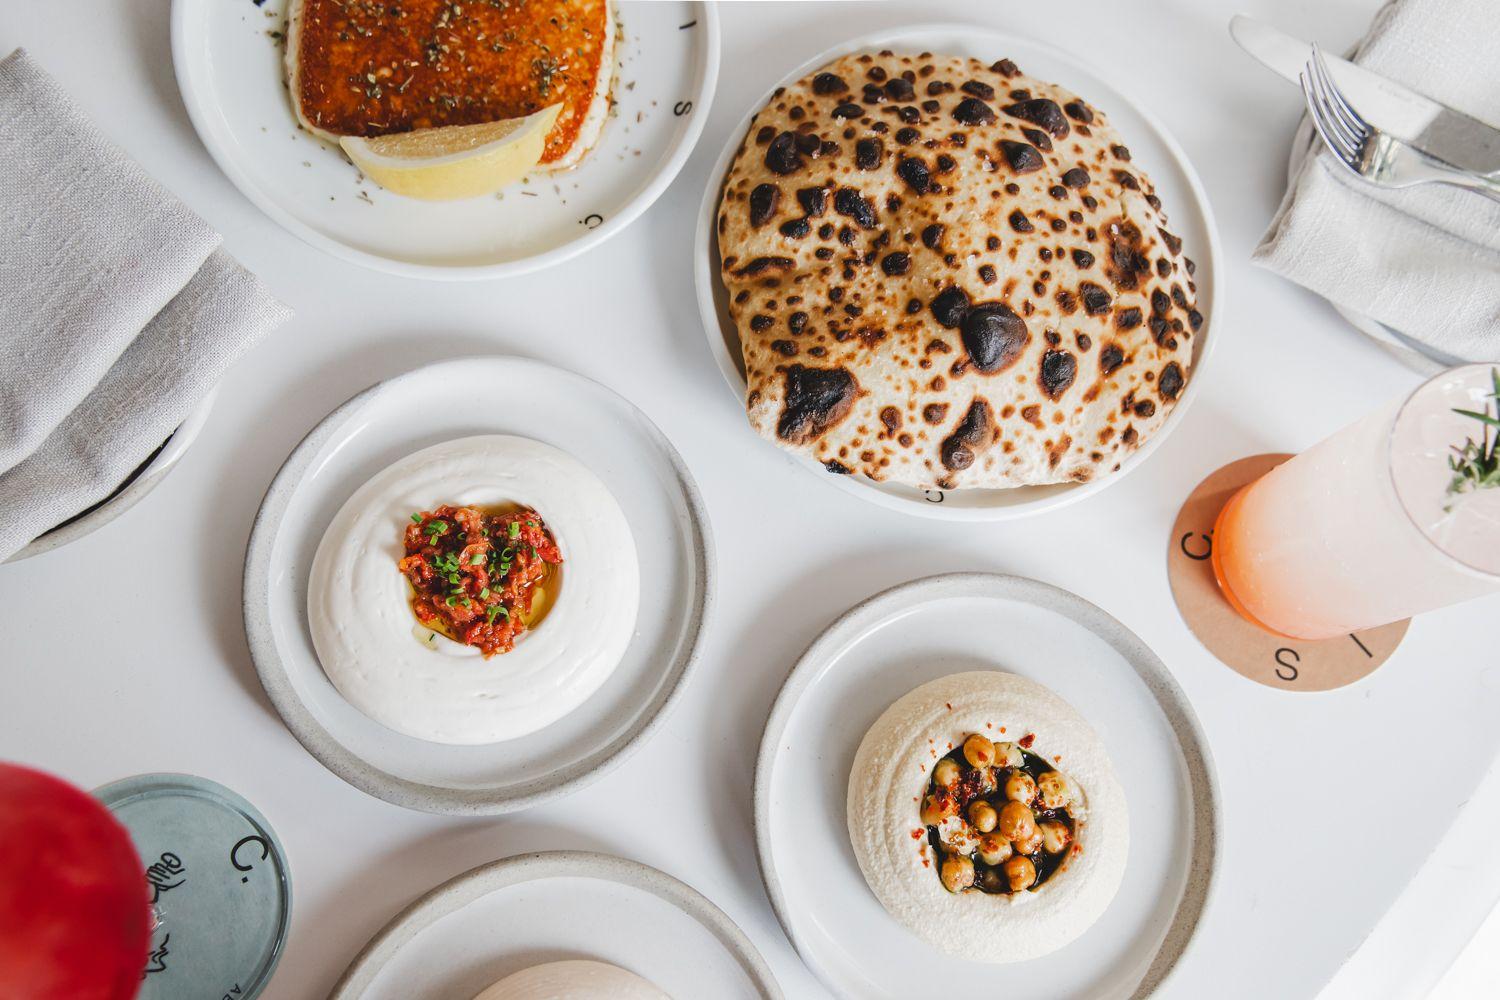 Flat lay of mezze dishes